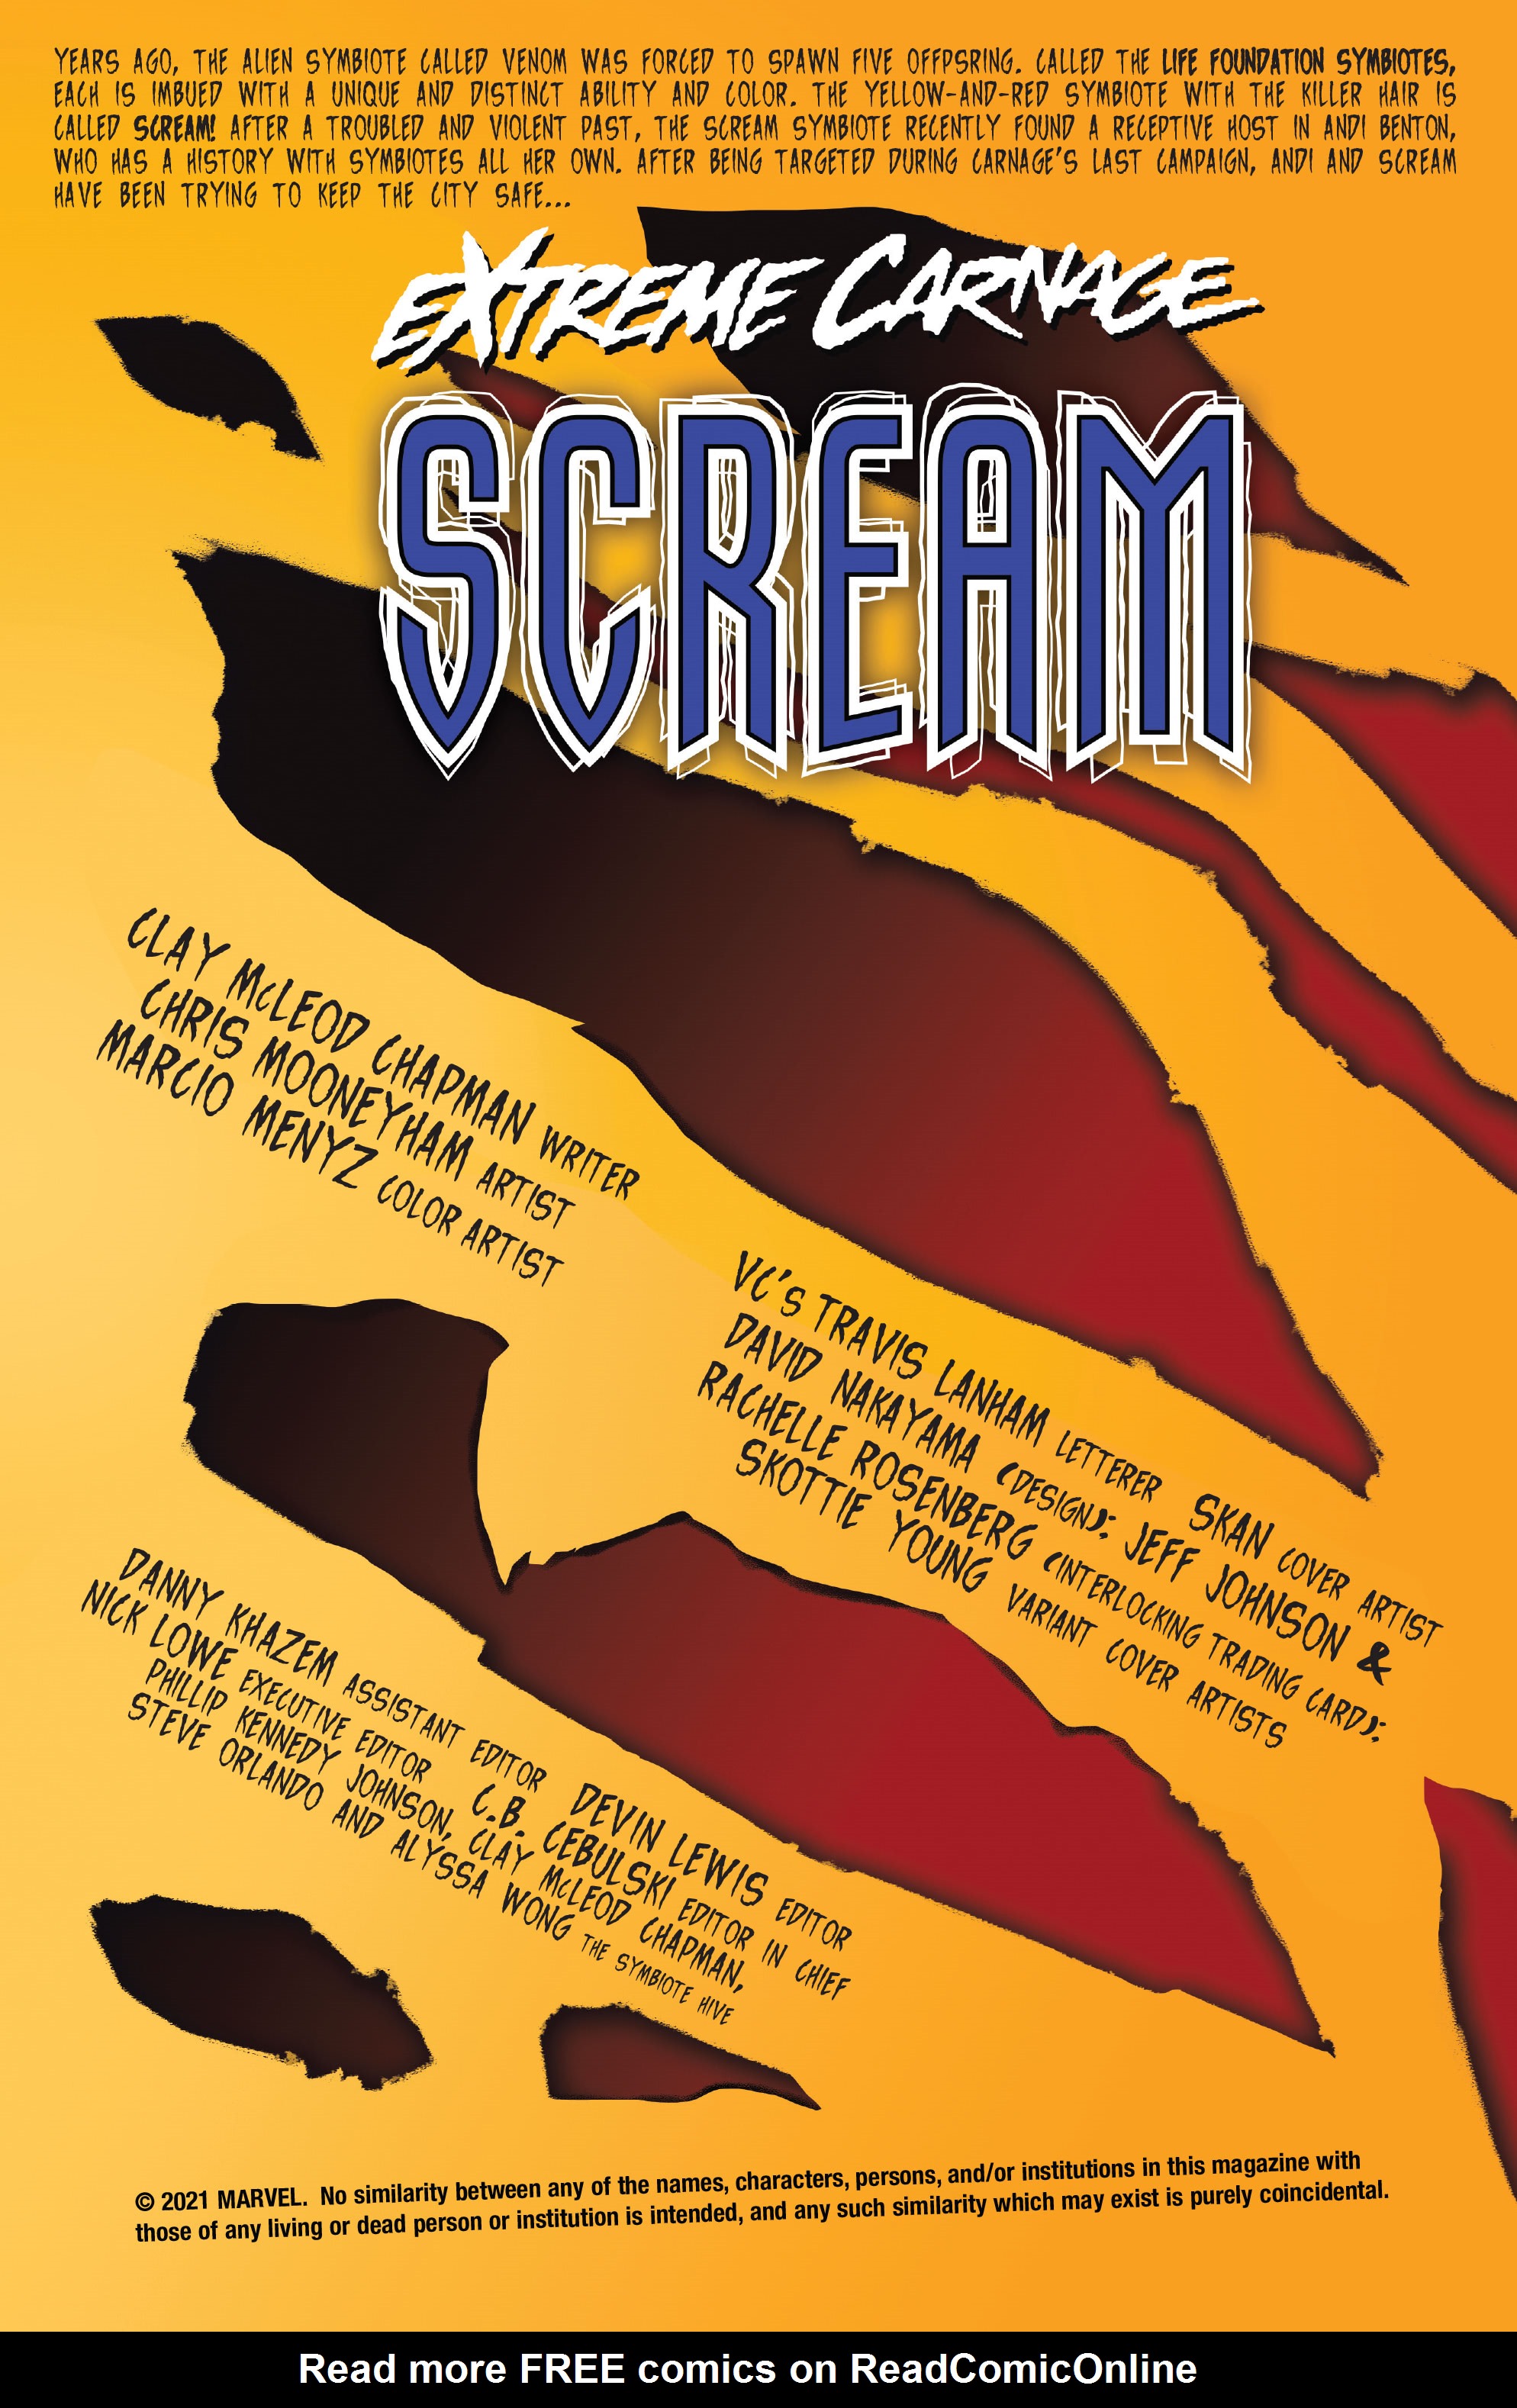 Read online Extreme Carnage comic -  Issue # Scream - 2